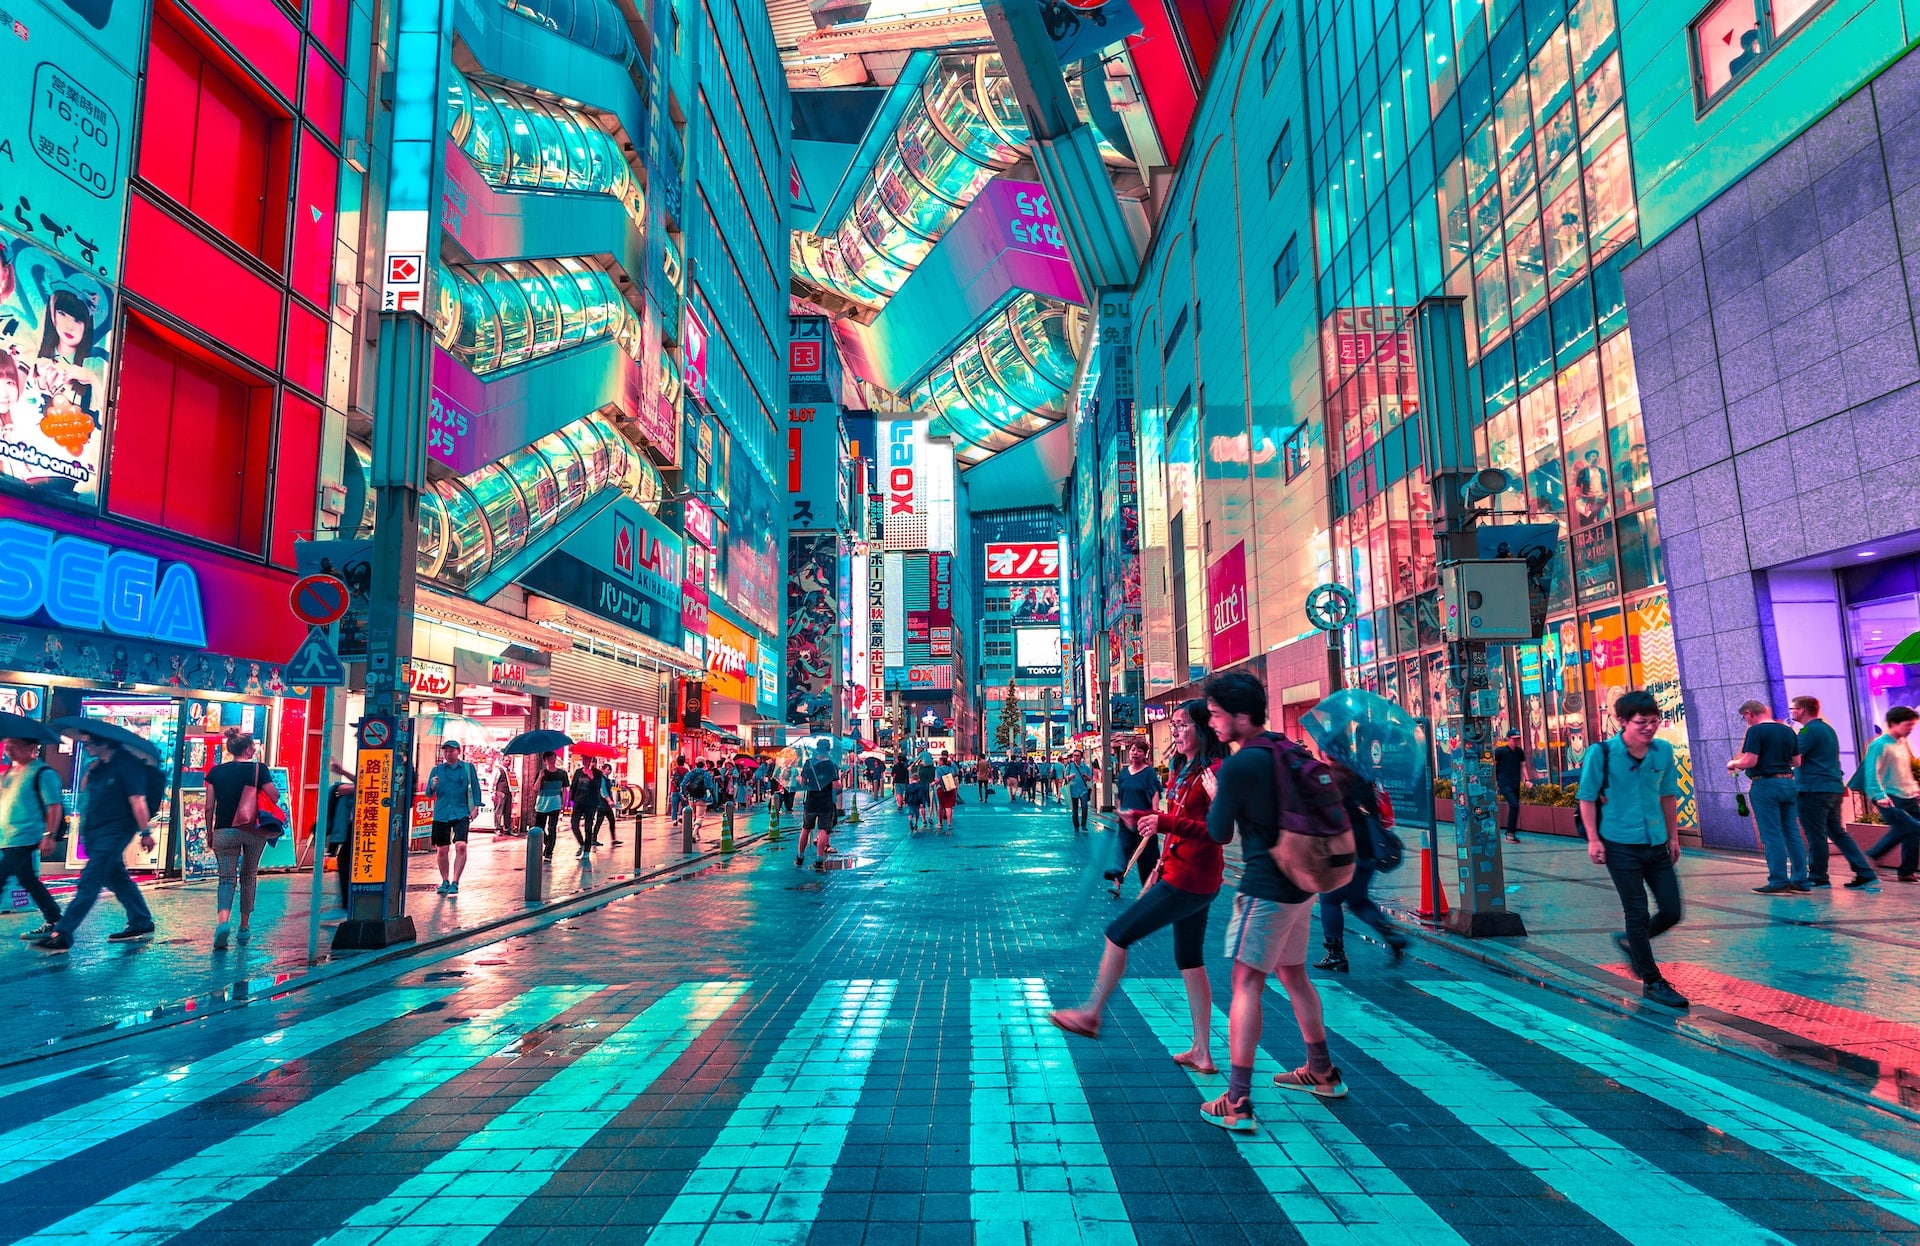 A Tokyo street at night lit up by neon signs